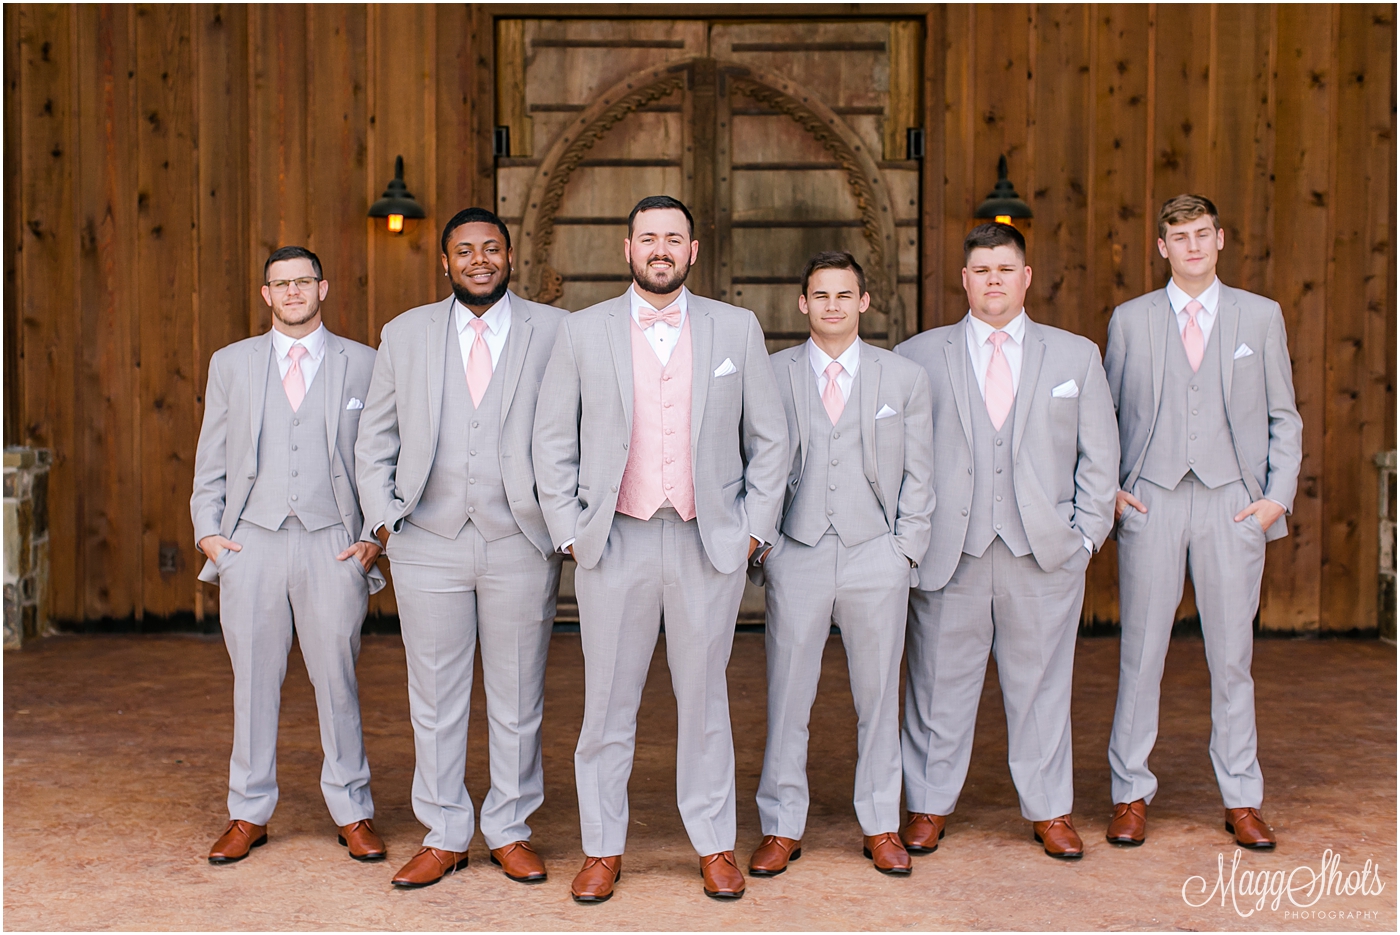 MaggShots Photography, DFW Wedding Photographer, Lucky Spur Wedding Photographer, Lucky Spur, Wedding Photographer, Justin wedding, Lucky Spur Wedding, wedding party, grooms party, boutonniere, wooden doors, 